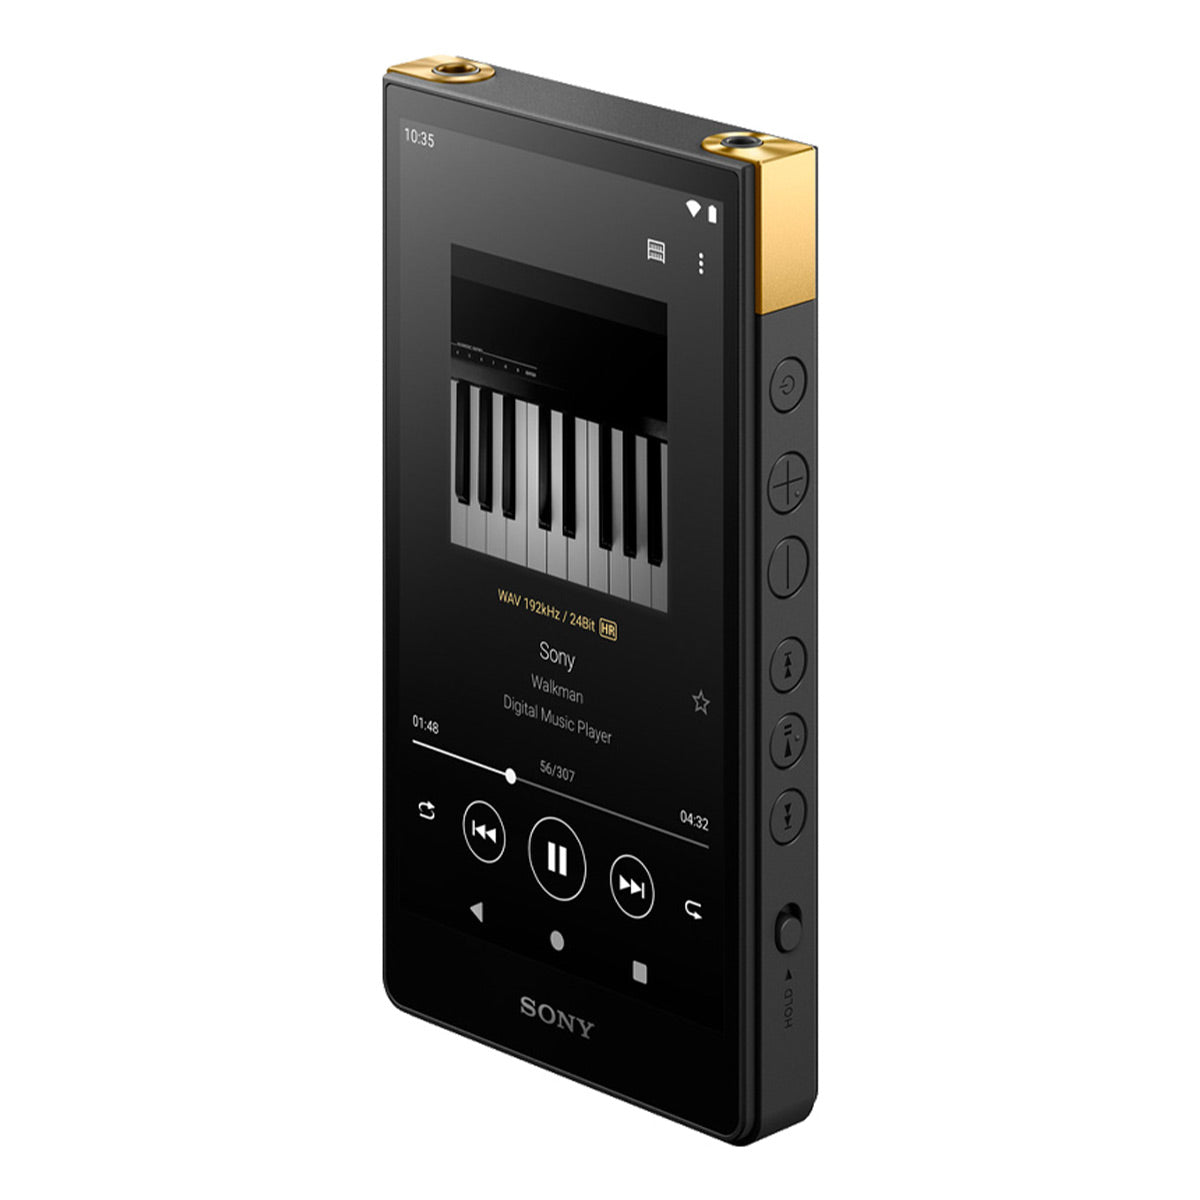 Sony NW-ZX707 Walkman ZX Series Hi-Res Digital Music Player with 